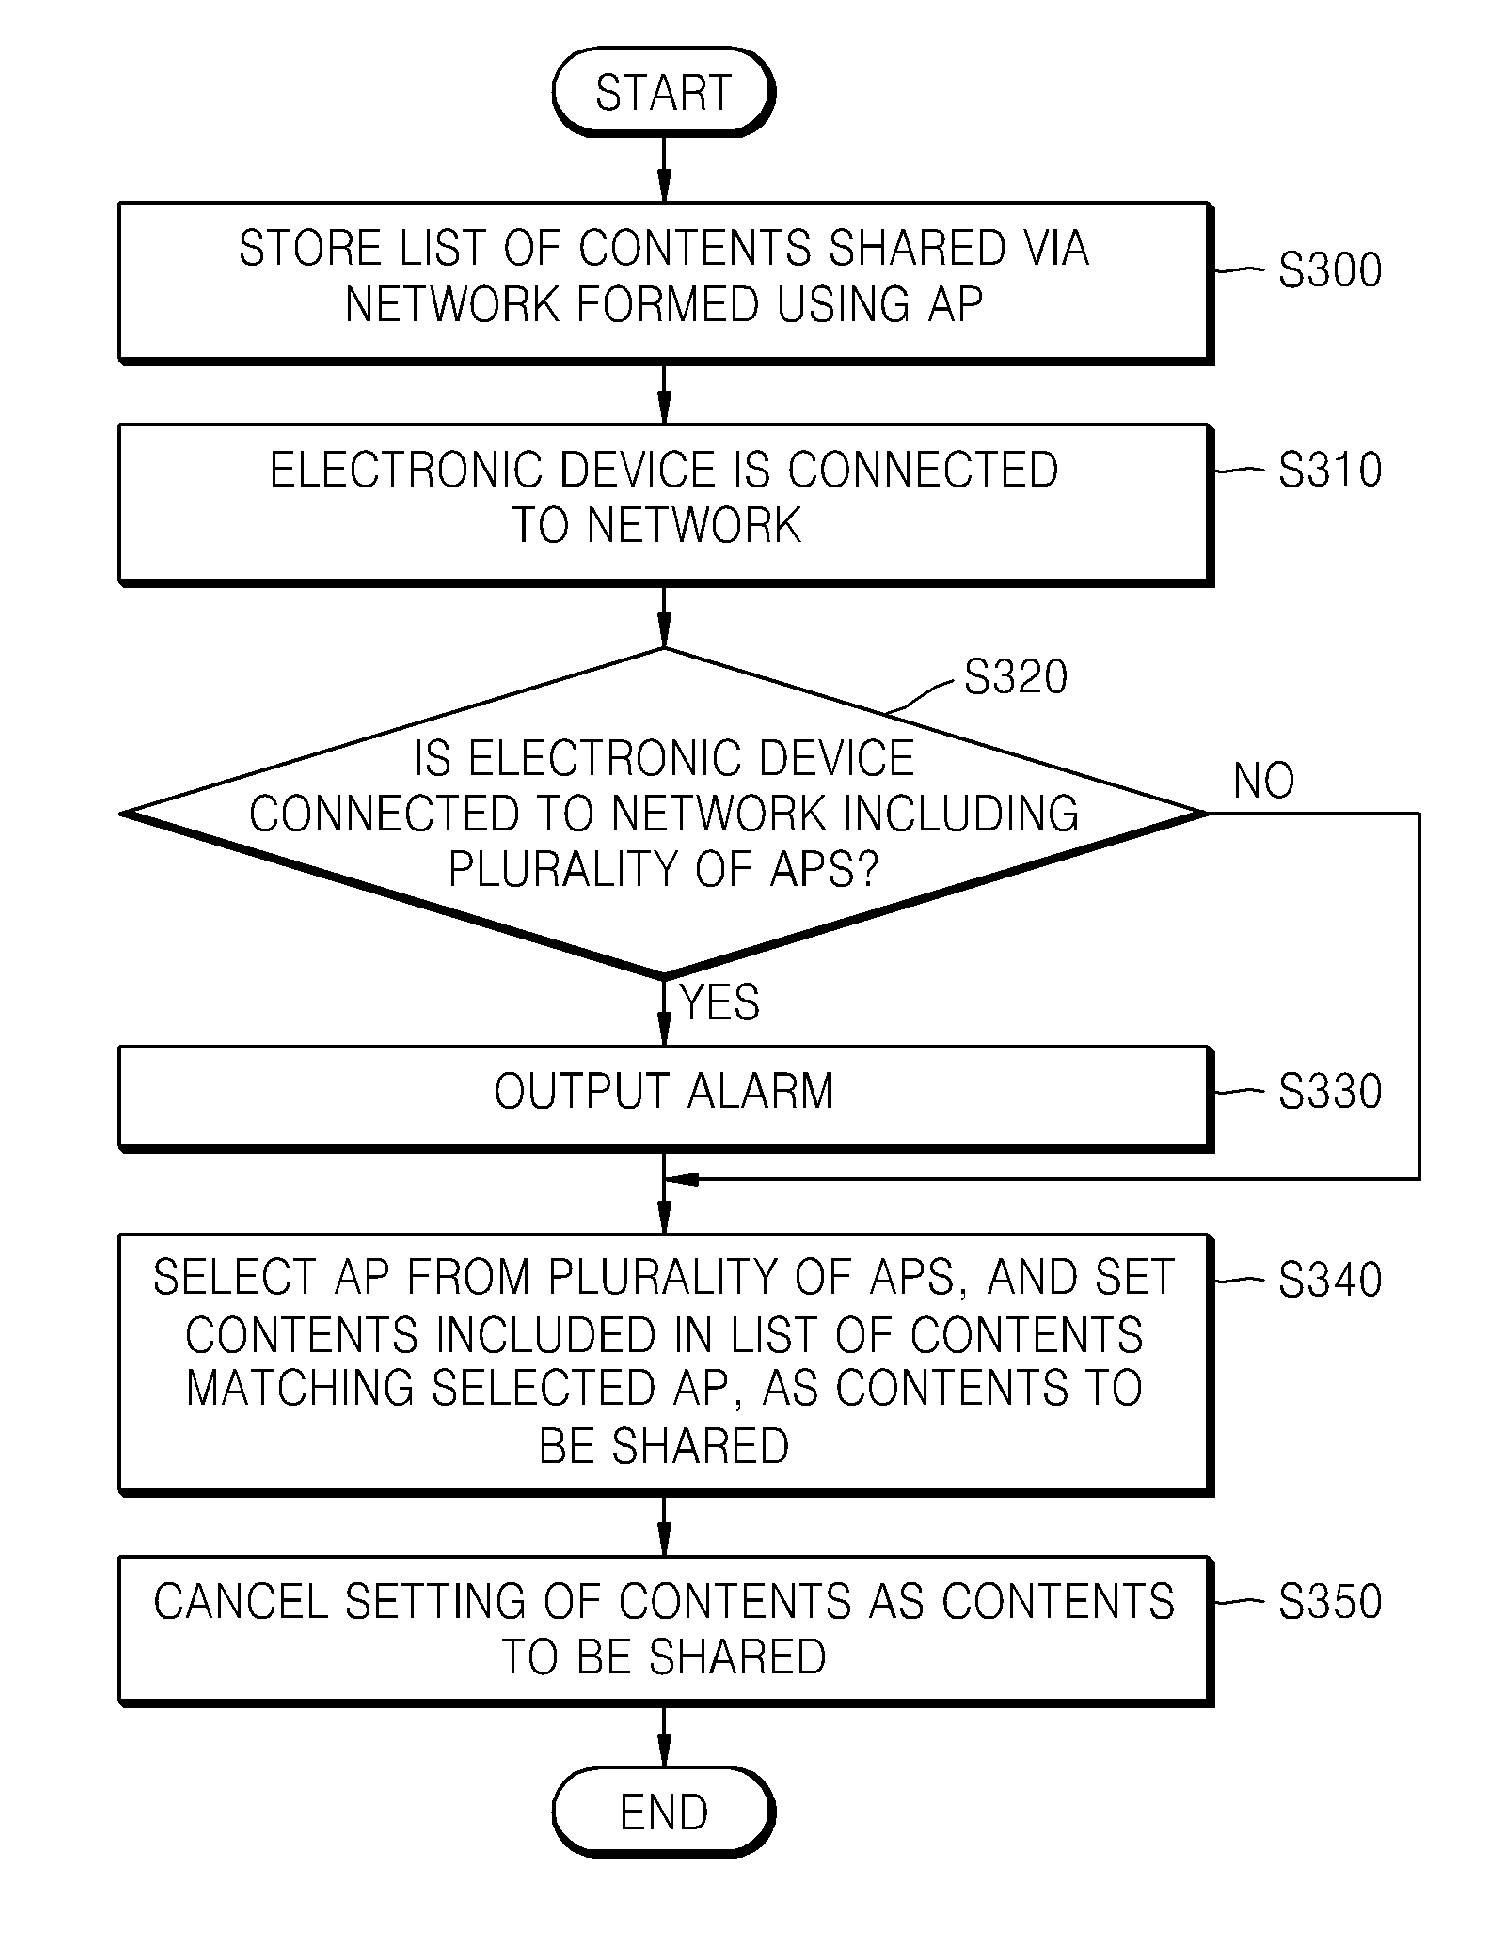 Electronic device and content sharing method